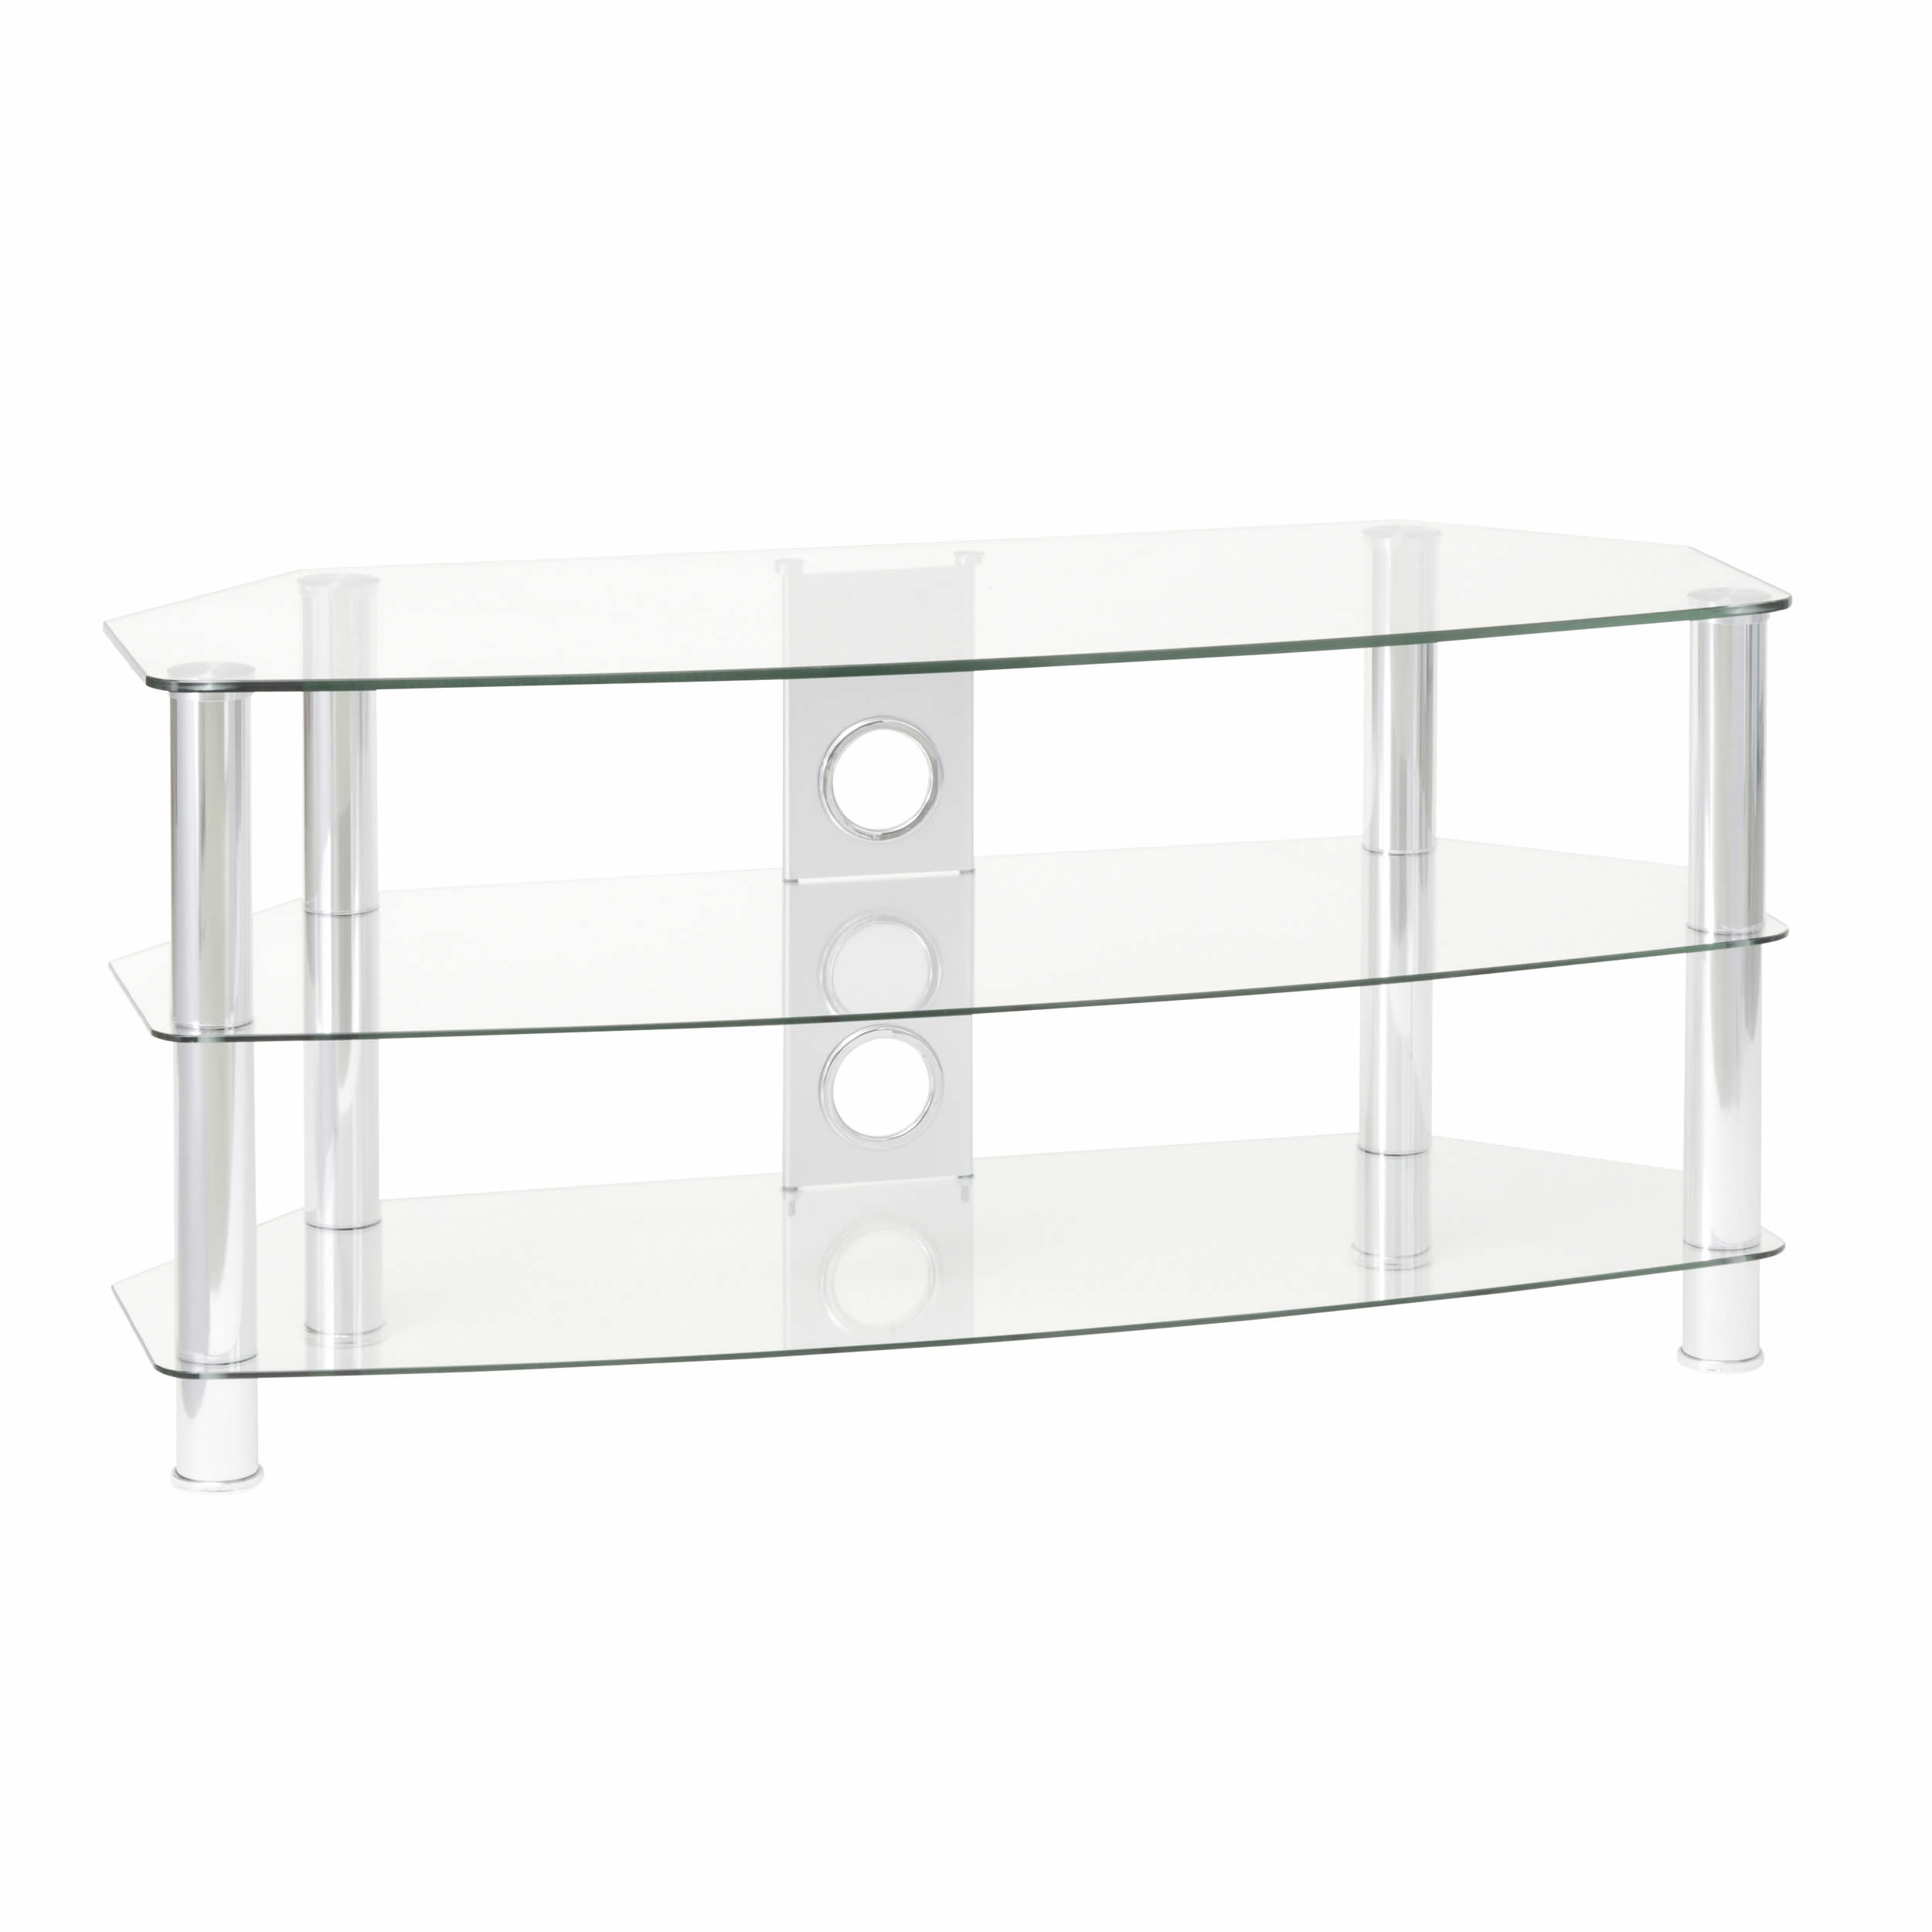 TTAP 1200mm TV Stand Upto 65inch Clear Glass Chrome Legs